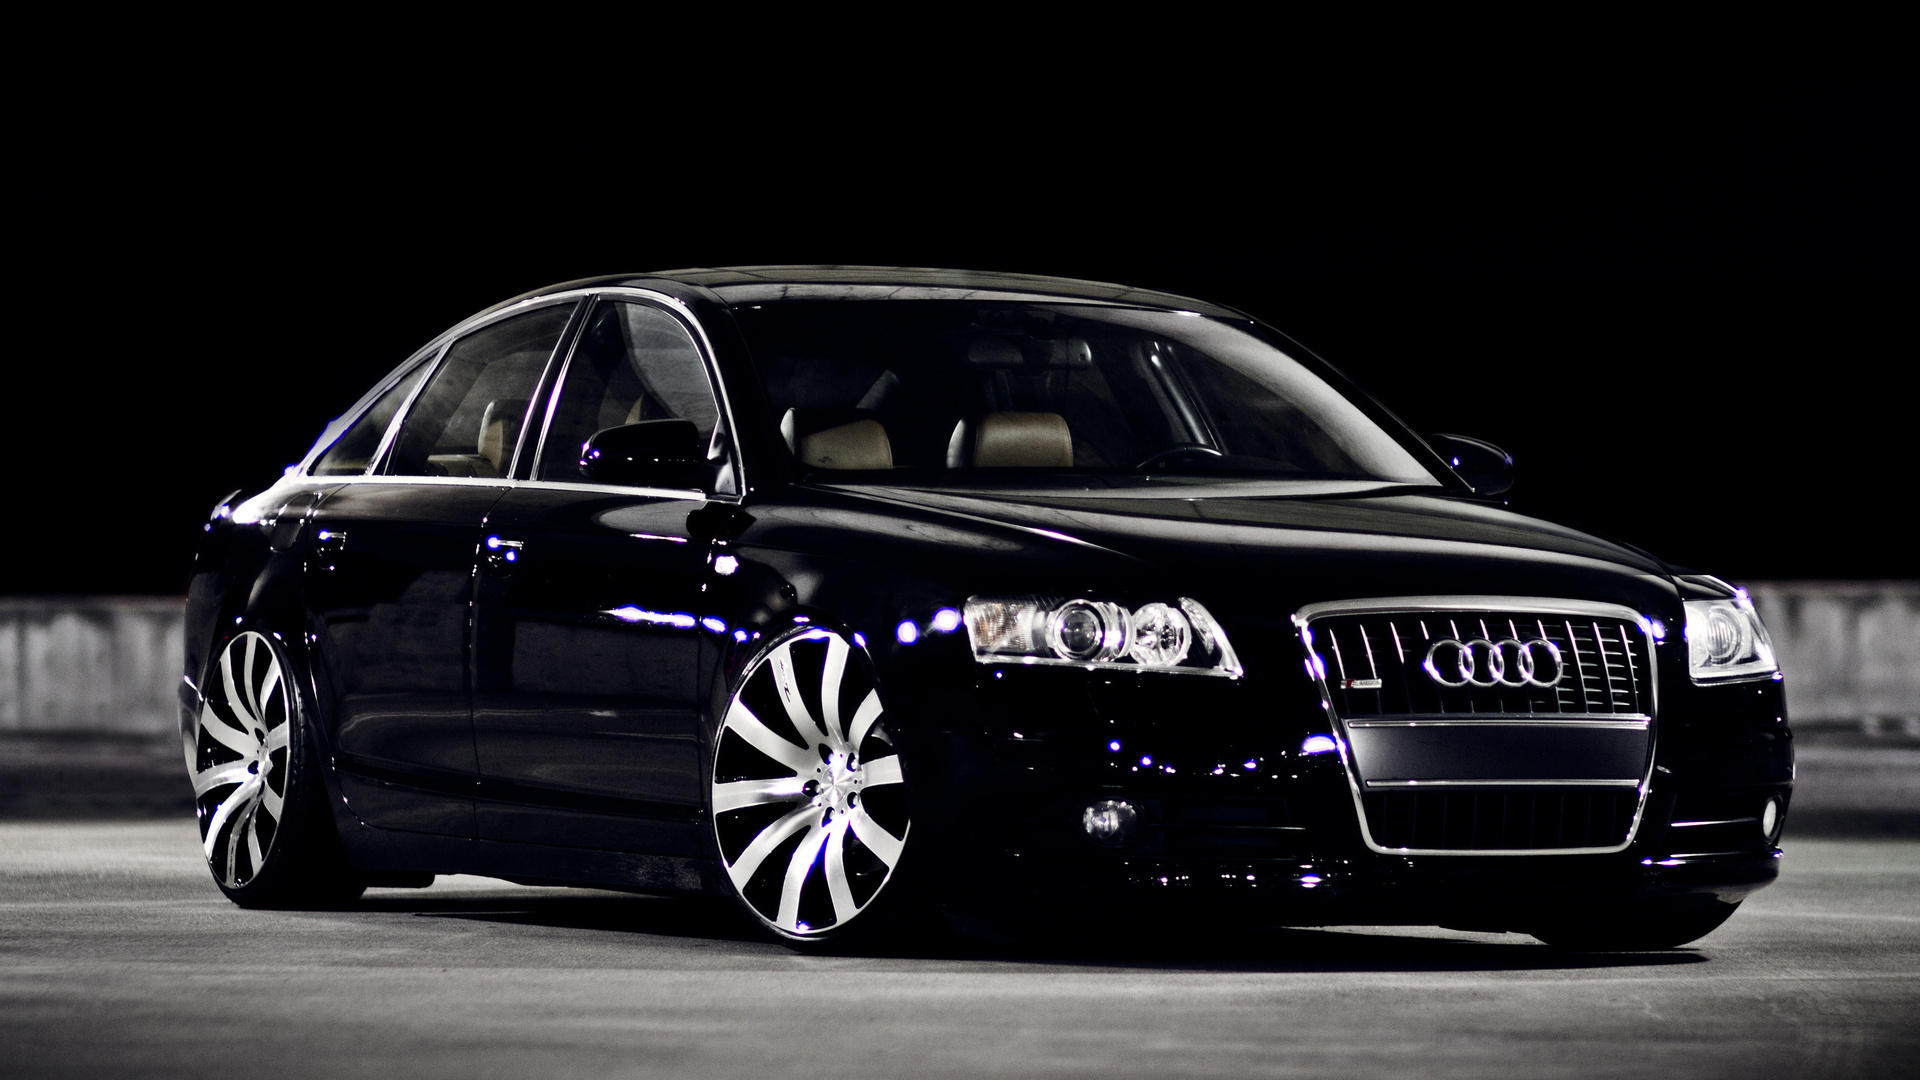 Audi A6 Wallpapers